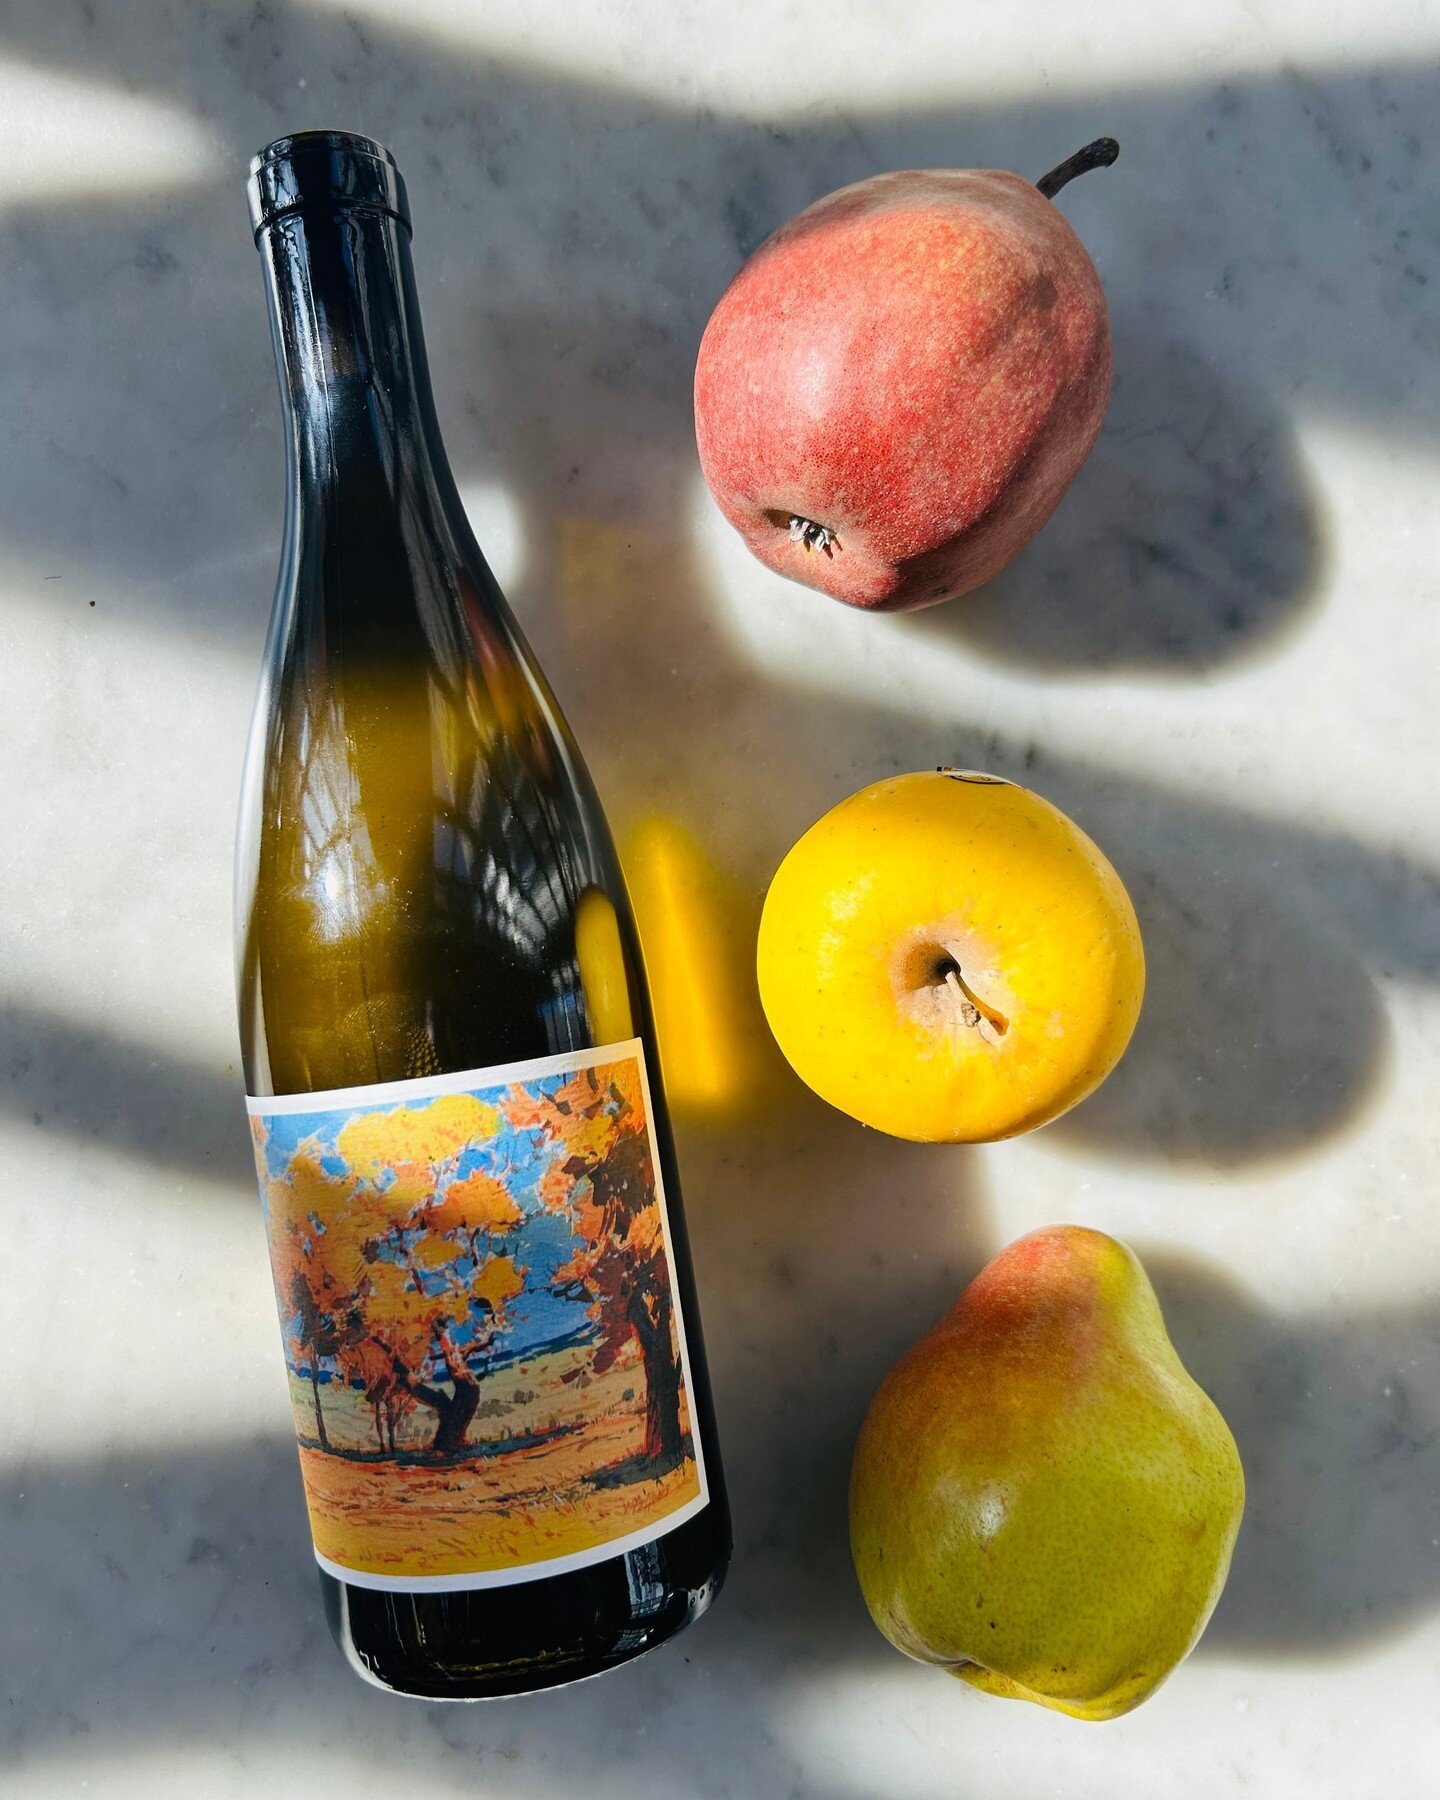 If you don't know Johan Vineyards, you have more to learn about what Oregon wine has to offer! An estate vineyard that has some lovely pinot noir, of course, and chardonnay - but also 'foreign' grape varieties such as savagnin, ribolla gialla, and zw